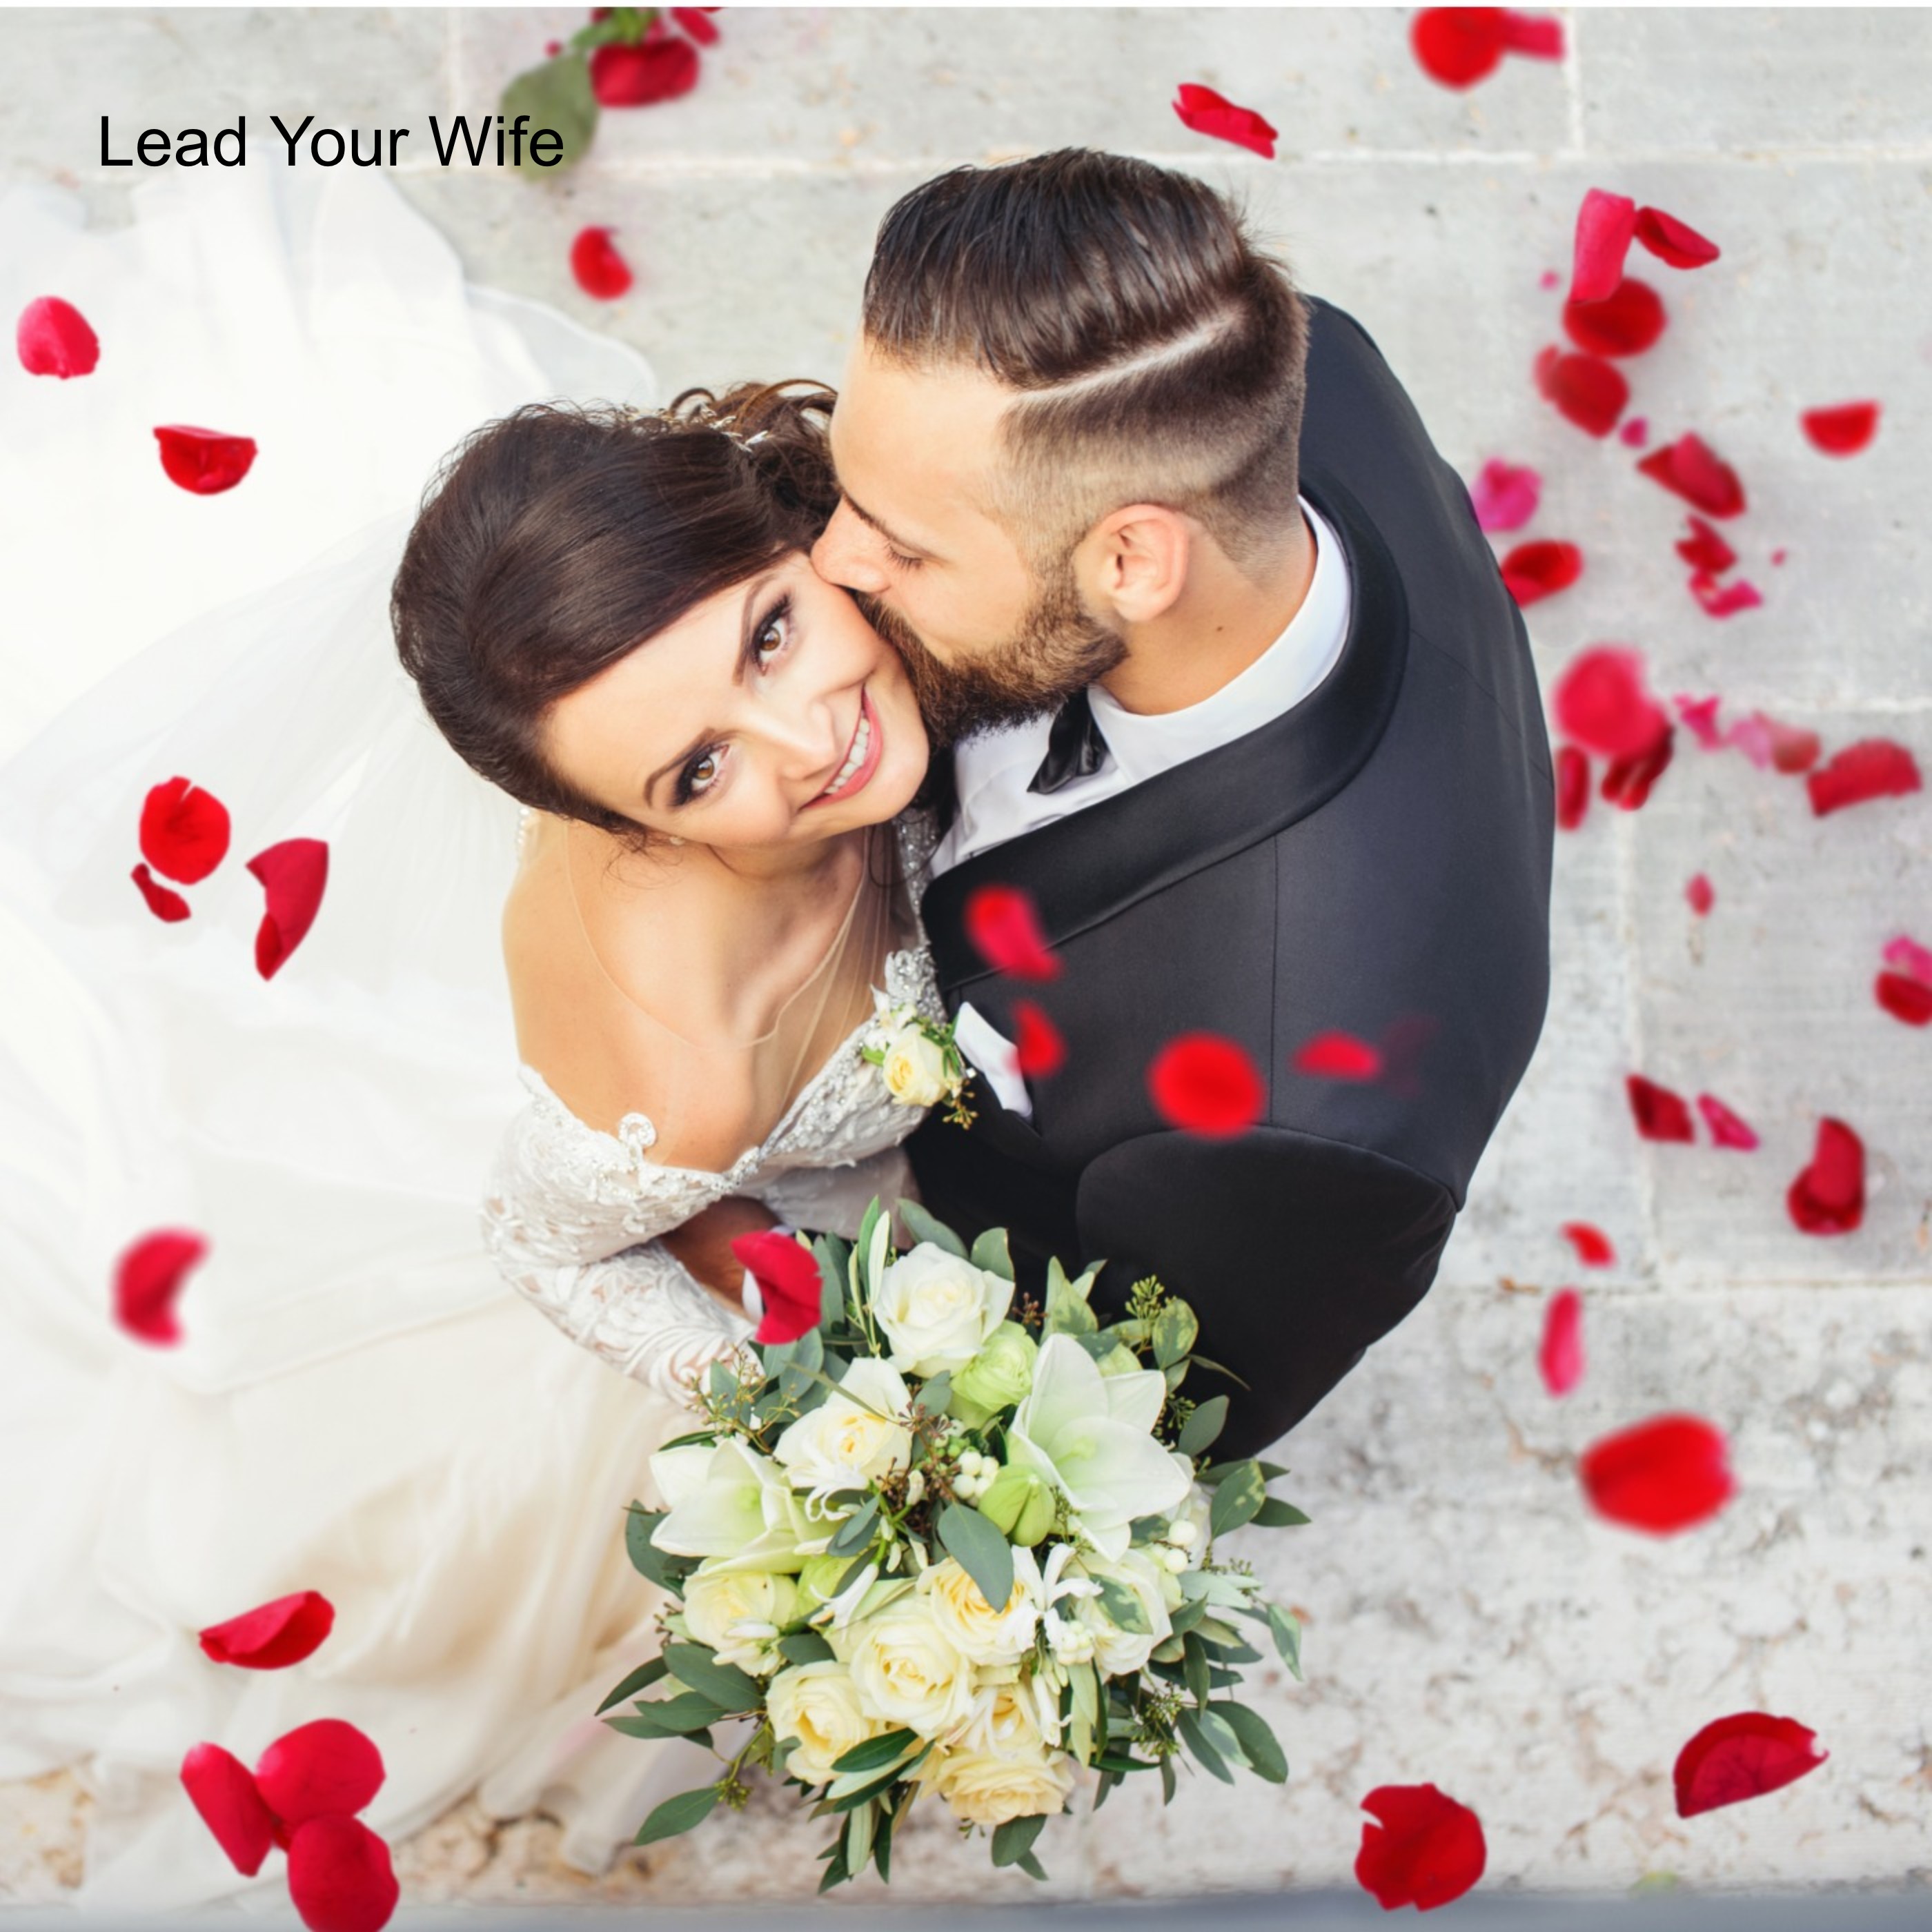 Lead Your Wife, a Podcast for Christian Men who Build Businesses and Want to Become an Elite Level Husband